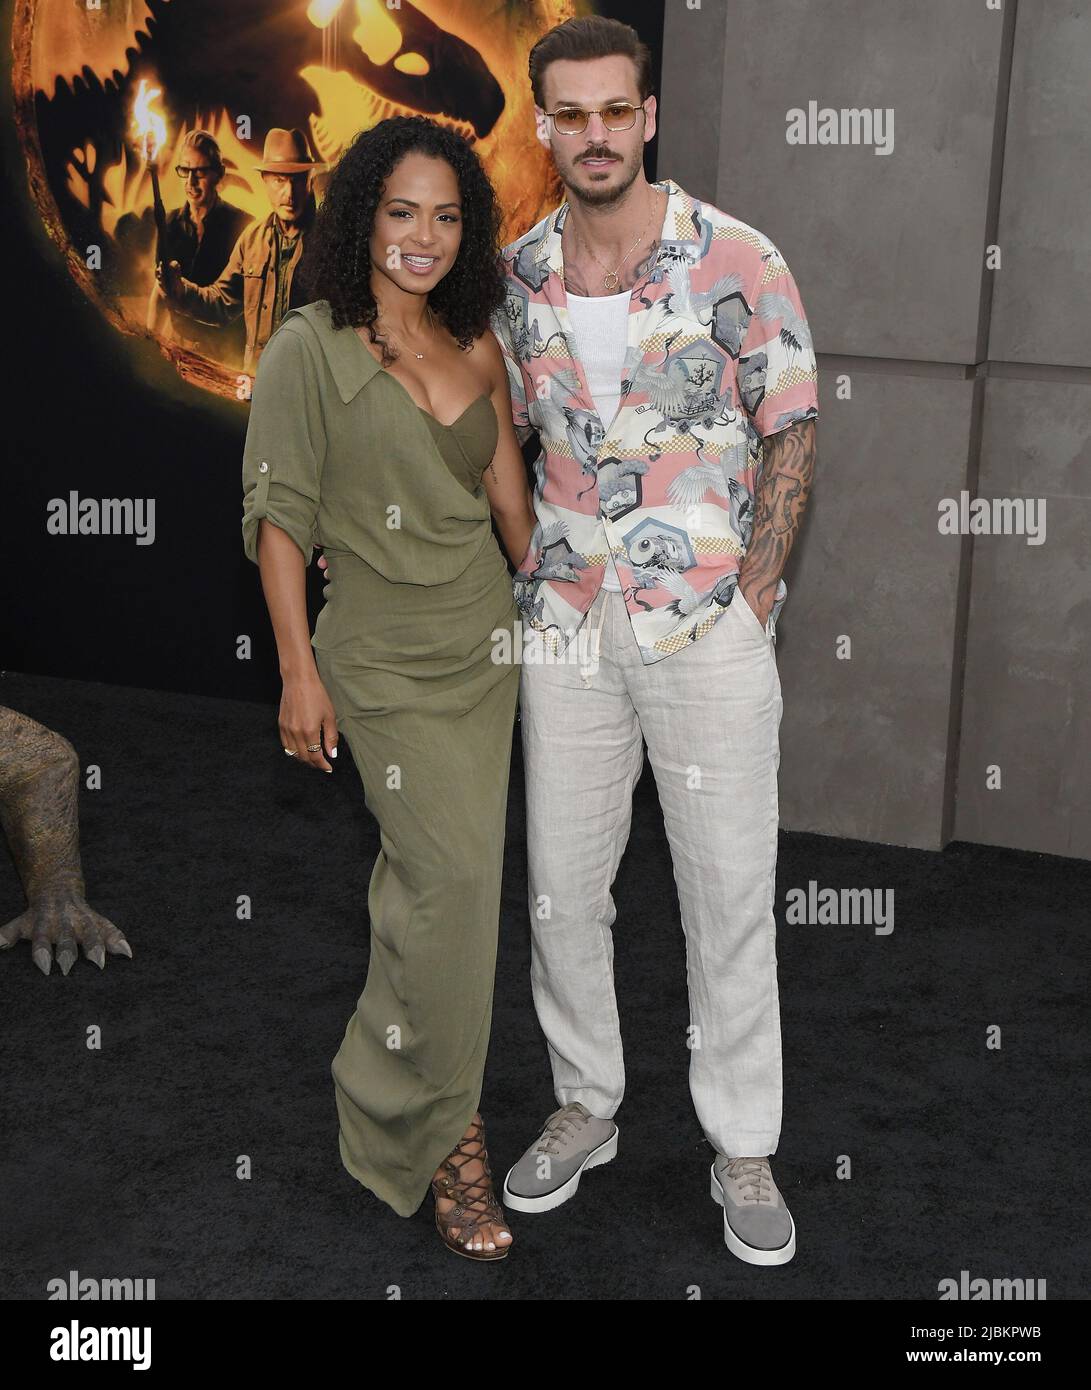 Los Angeles, USA. 06th June, 2022. (L-R) Christina Milian and Matt Pokora at the Universal Pictures' JURASSIC WORLD DOMINION Premiere held at the TCL Chinese Theater on Monday, ?June 6, 2022. (Photo By Sthanlee B. Mirador/Sipa USA) Credit: Sipa USA/Alamy Live News Stock Photo